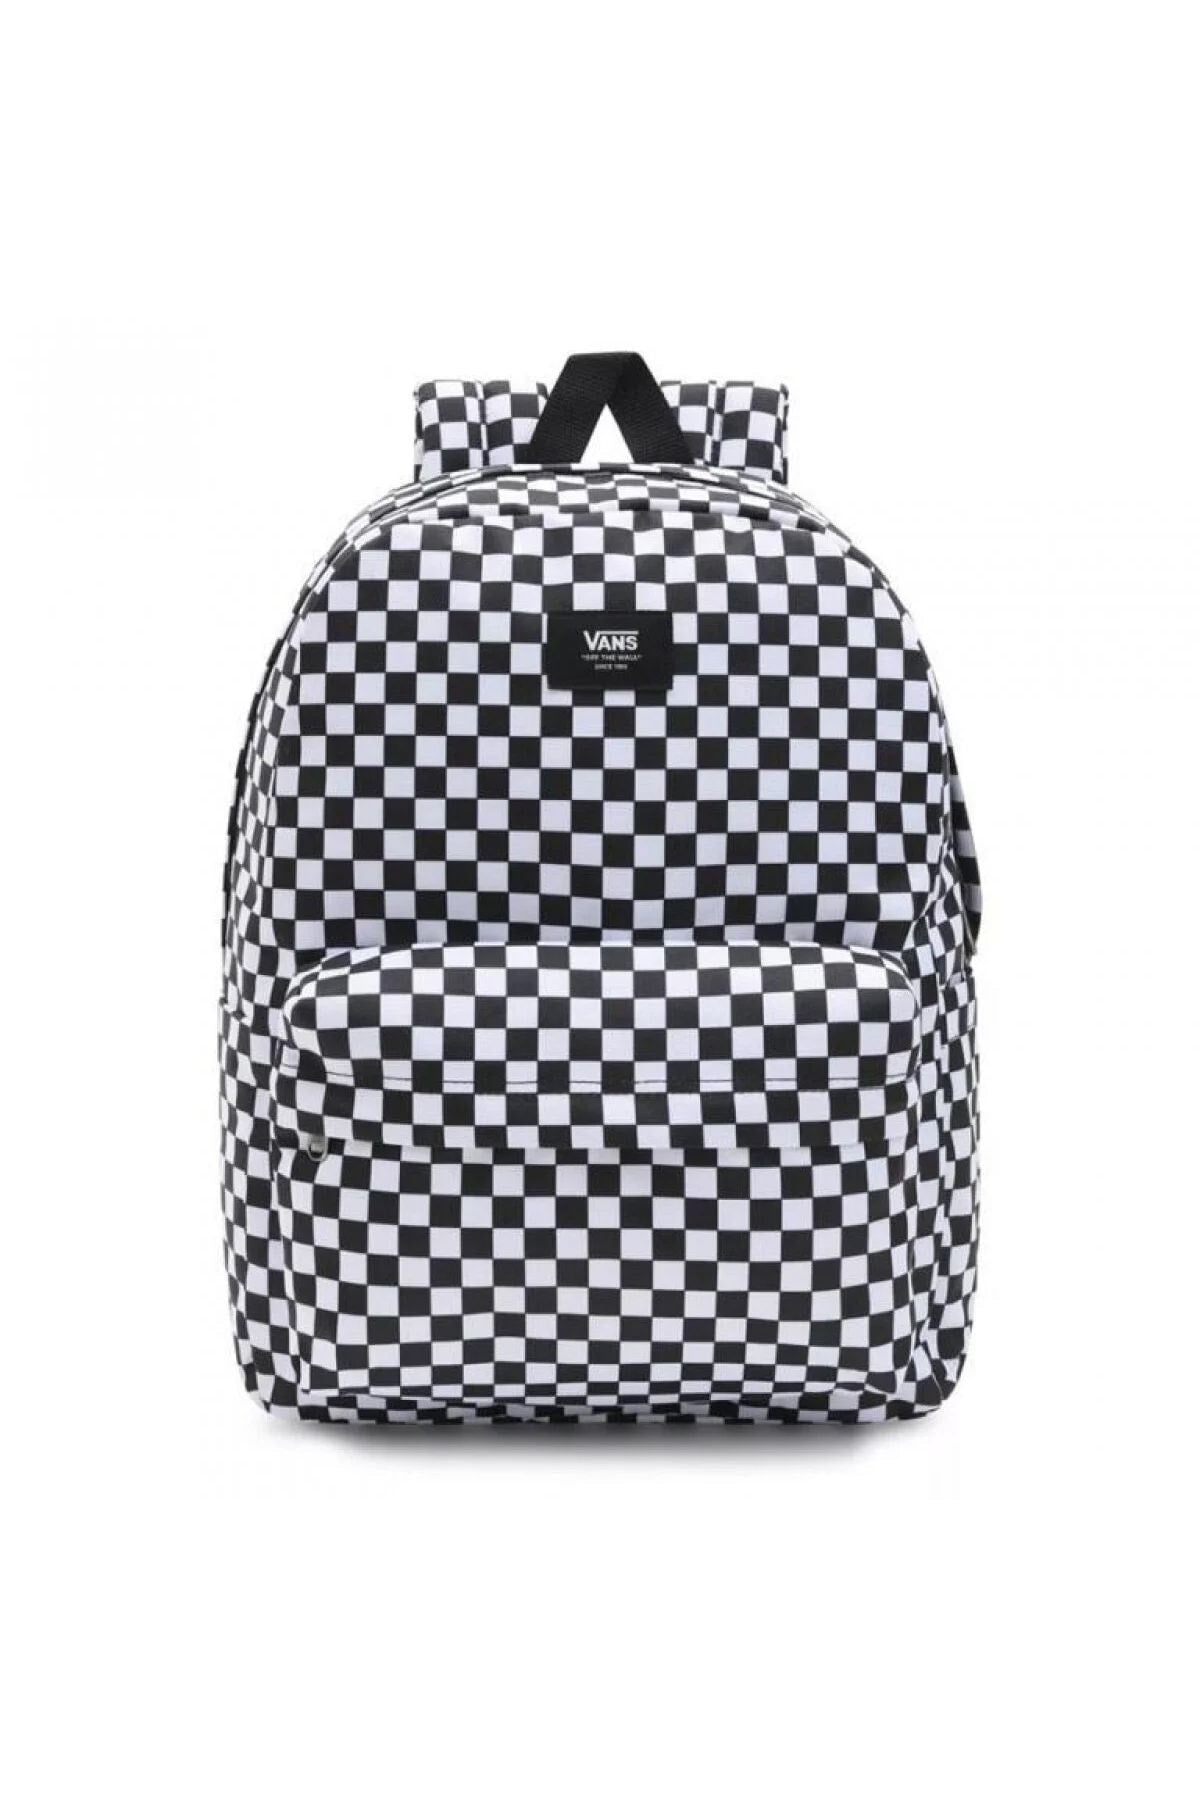 Unisex Old Skool Check Checkered Pattern Unisex Backpack Vn0a5khry281